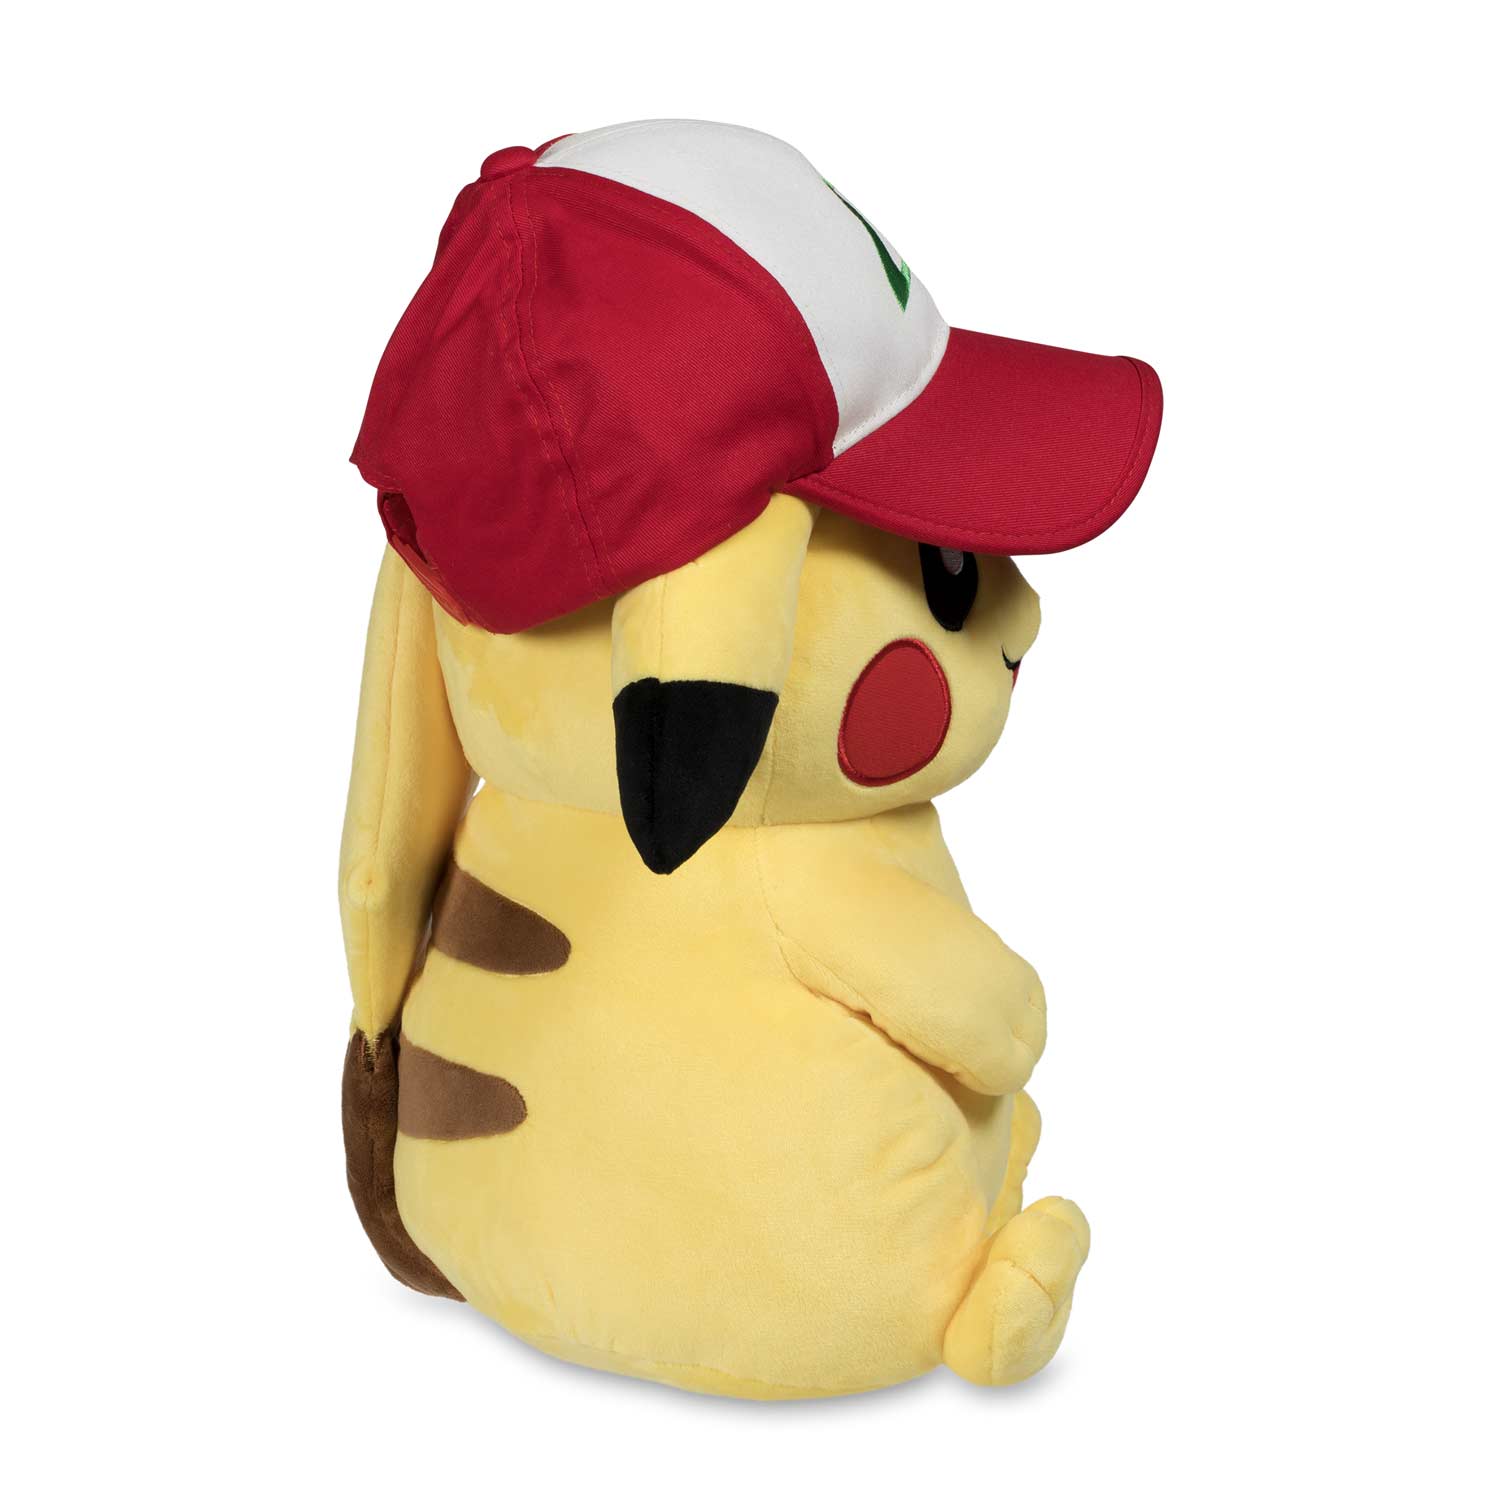 Kanto Trainer Hat Pikachu Pokemon Plush 16/" and trading cards